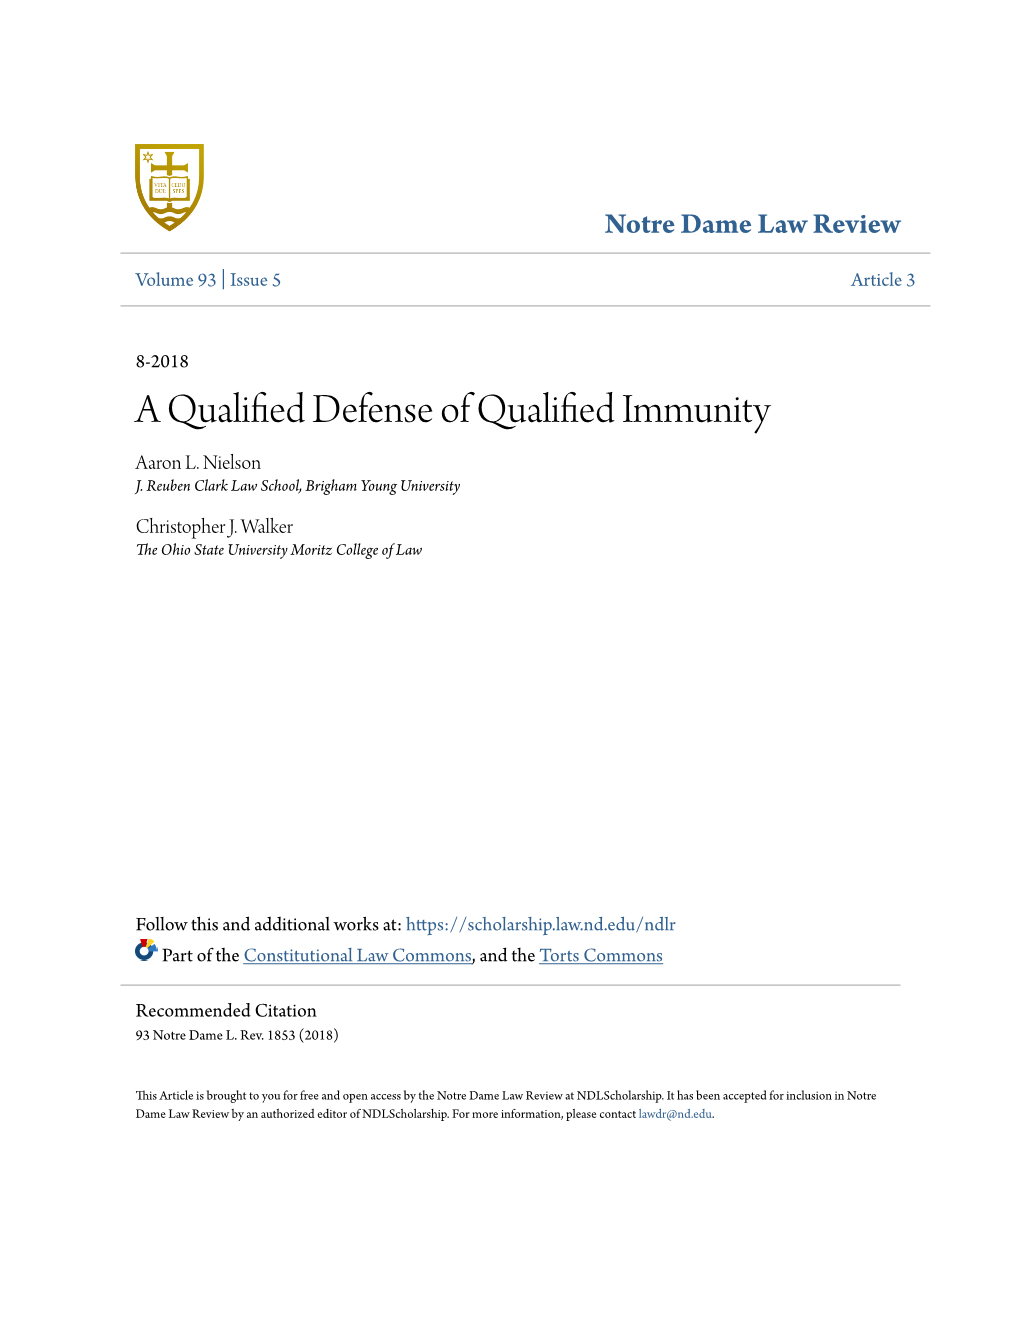 A Qualified Defense of Qualified Immunity